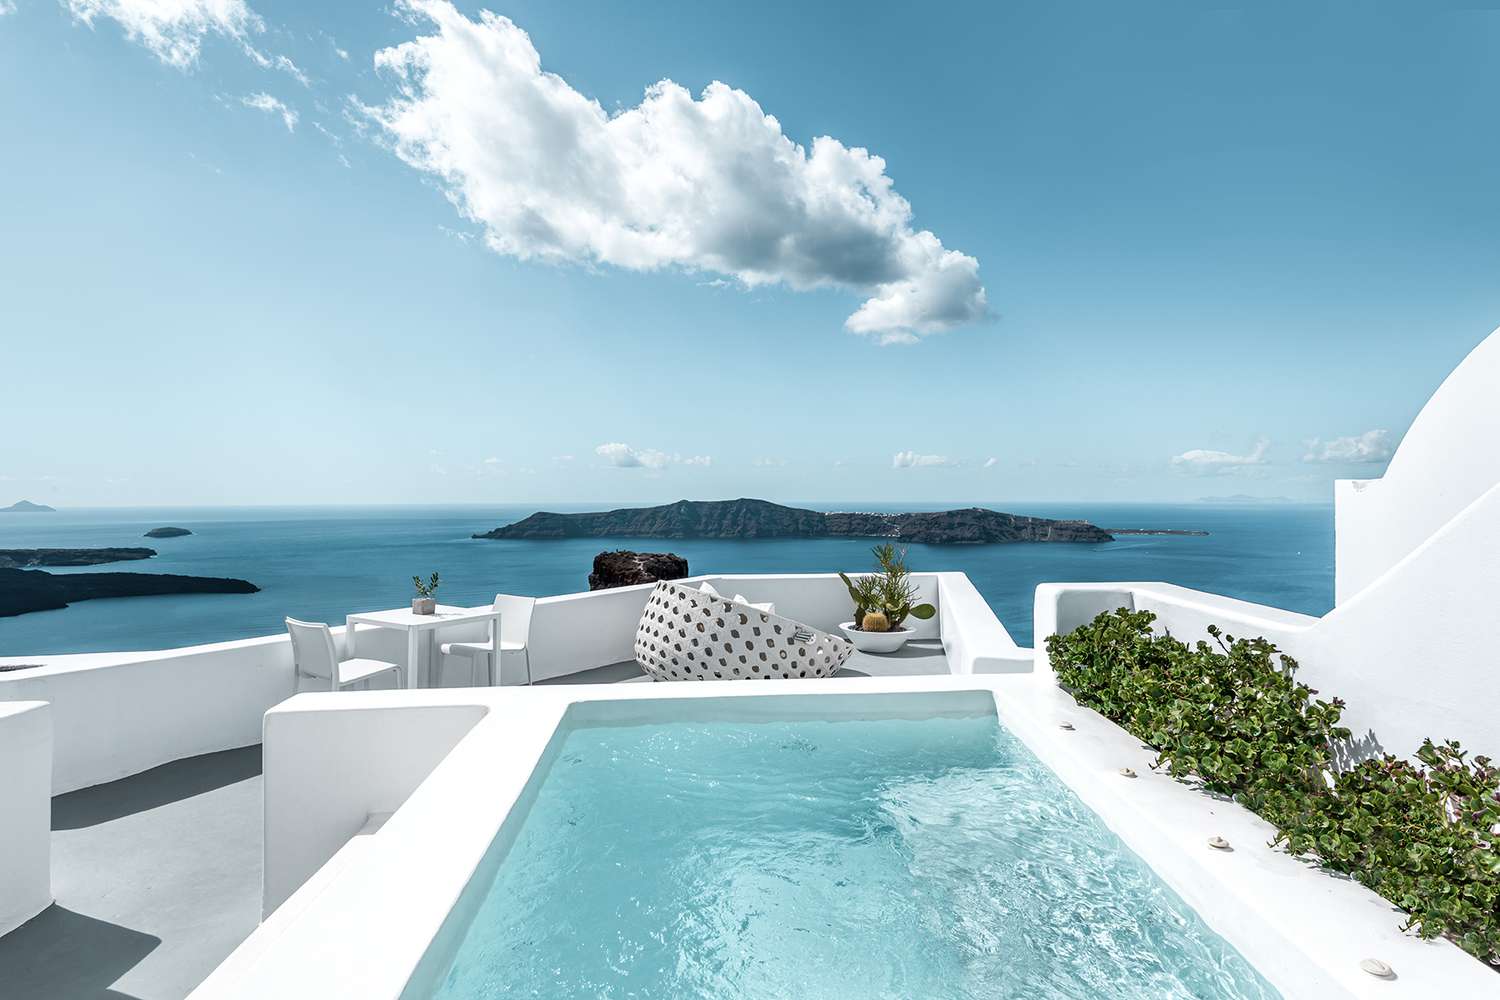 Private pool with view of ocean at Grace Hotel, Auberge Resorts Collection